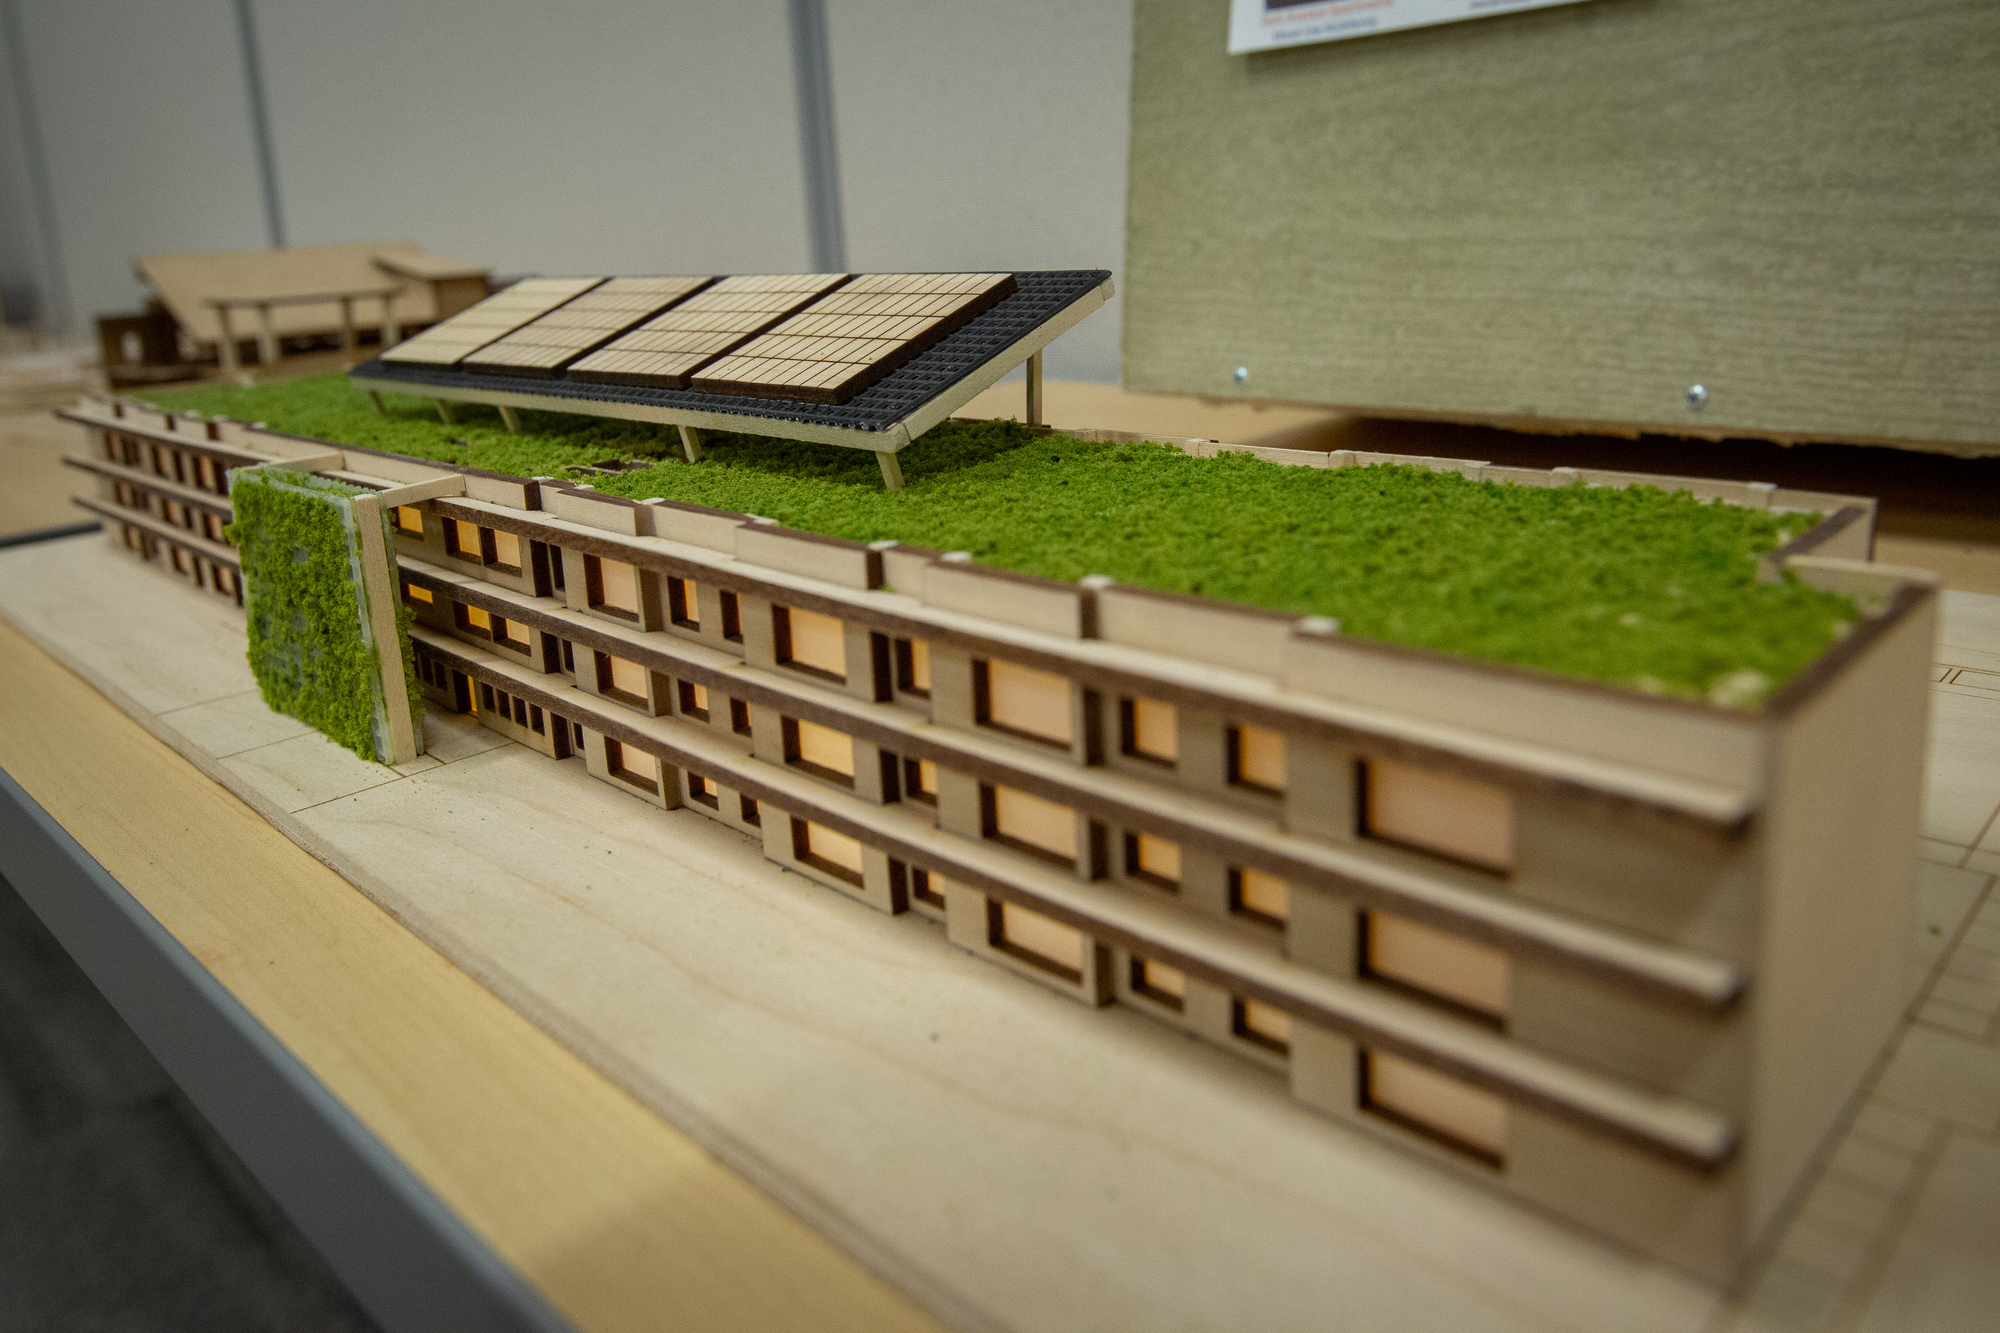 Scale model of a house from the competition.